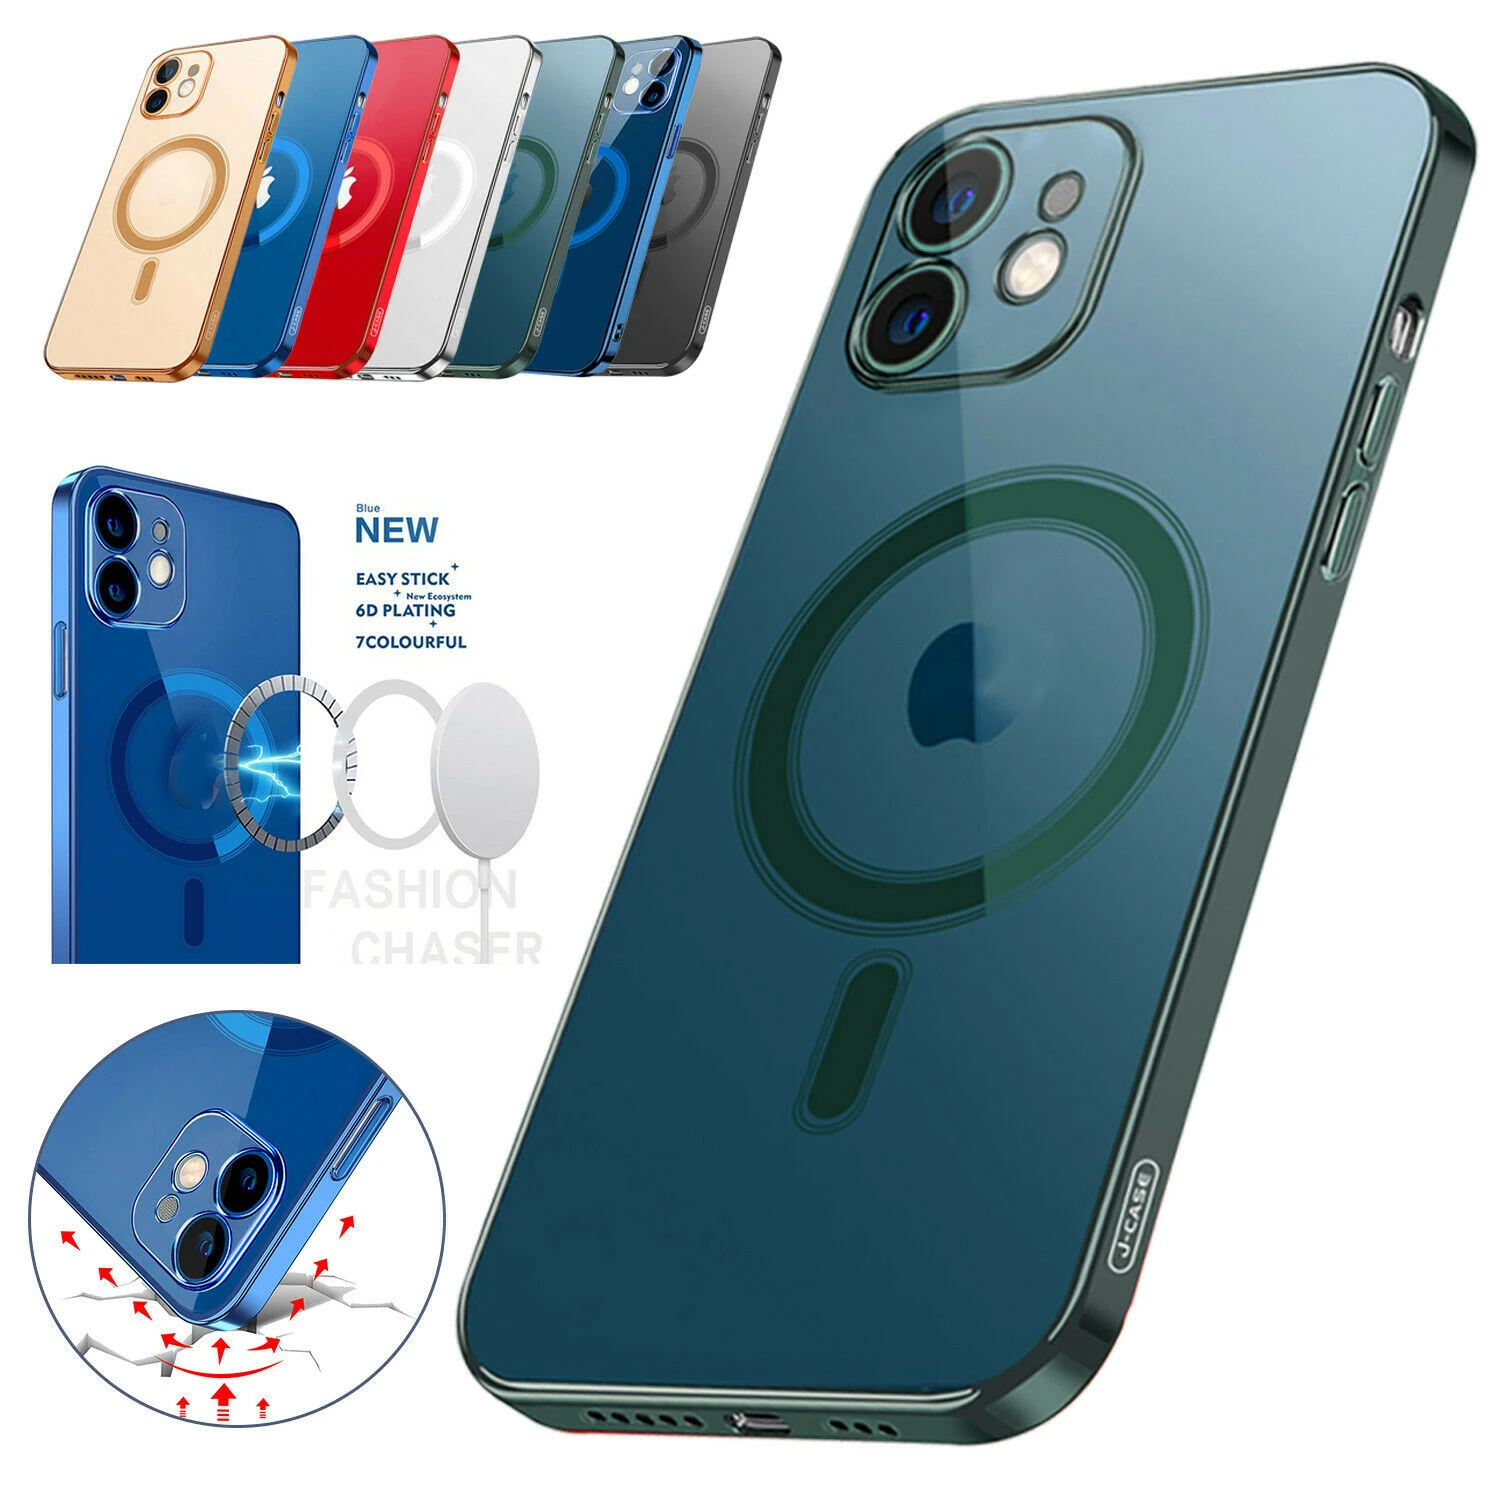 Magnetic Clear Phone Case Mag Safe Cover For Apple Iphone 12 Pro Max Buy Mag Safe Clear Tpu Case For Iphone12 Magsafe Case For Iphone12 For Iphone12 Magnetic Clear Cover Product On Alibaba Com